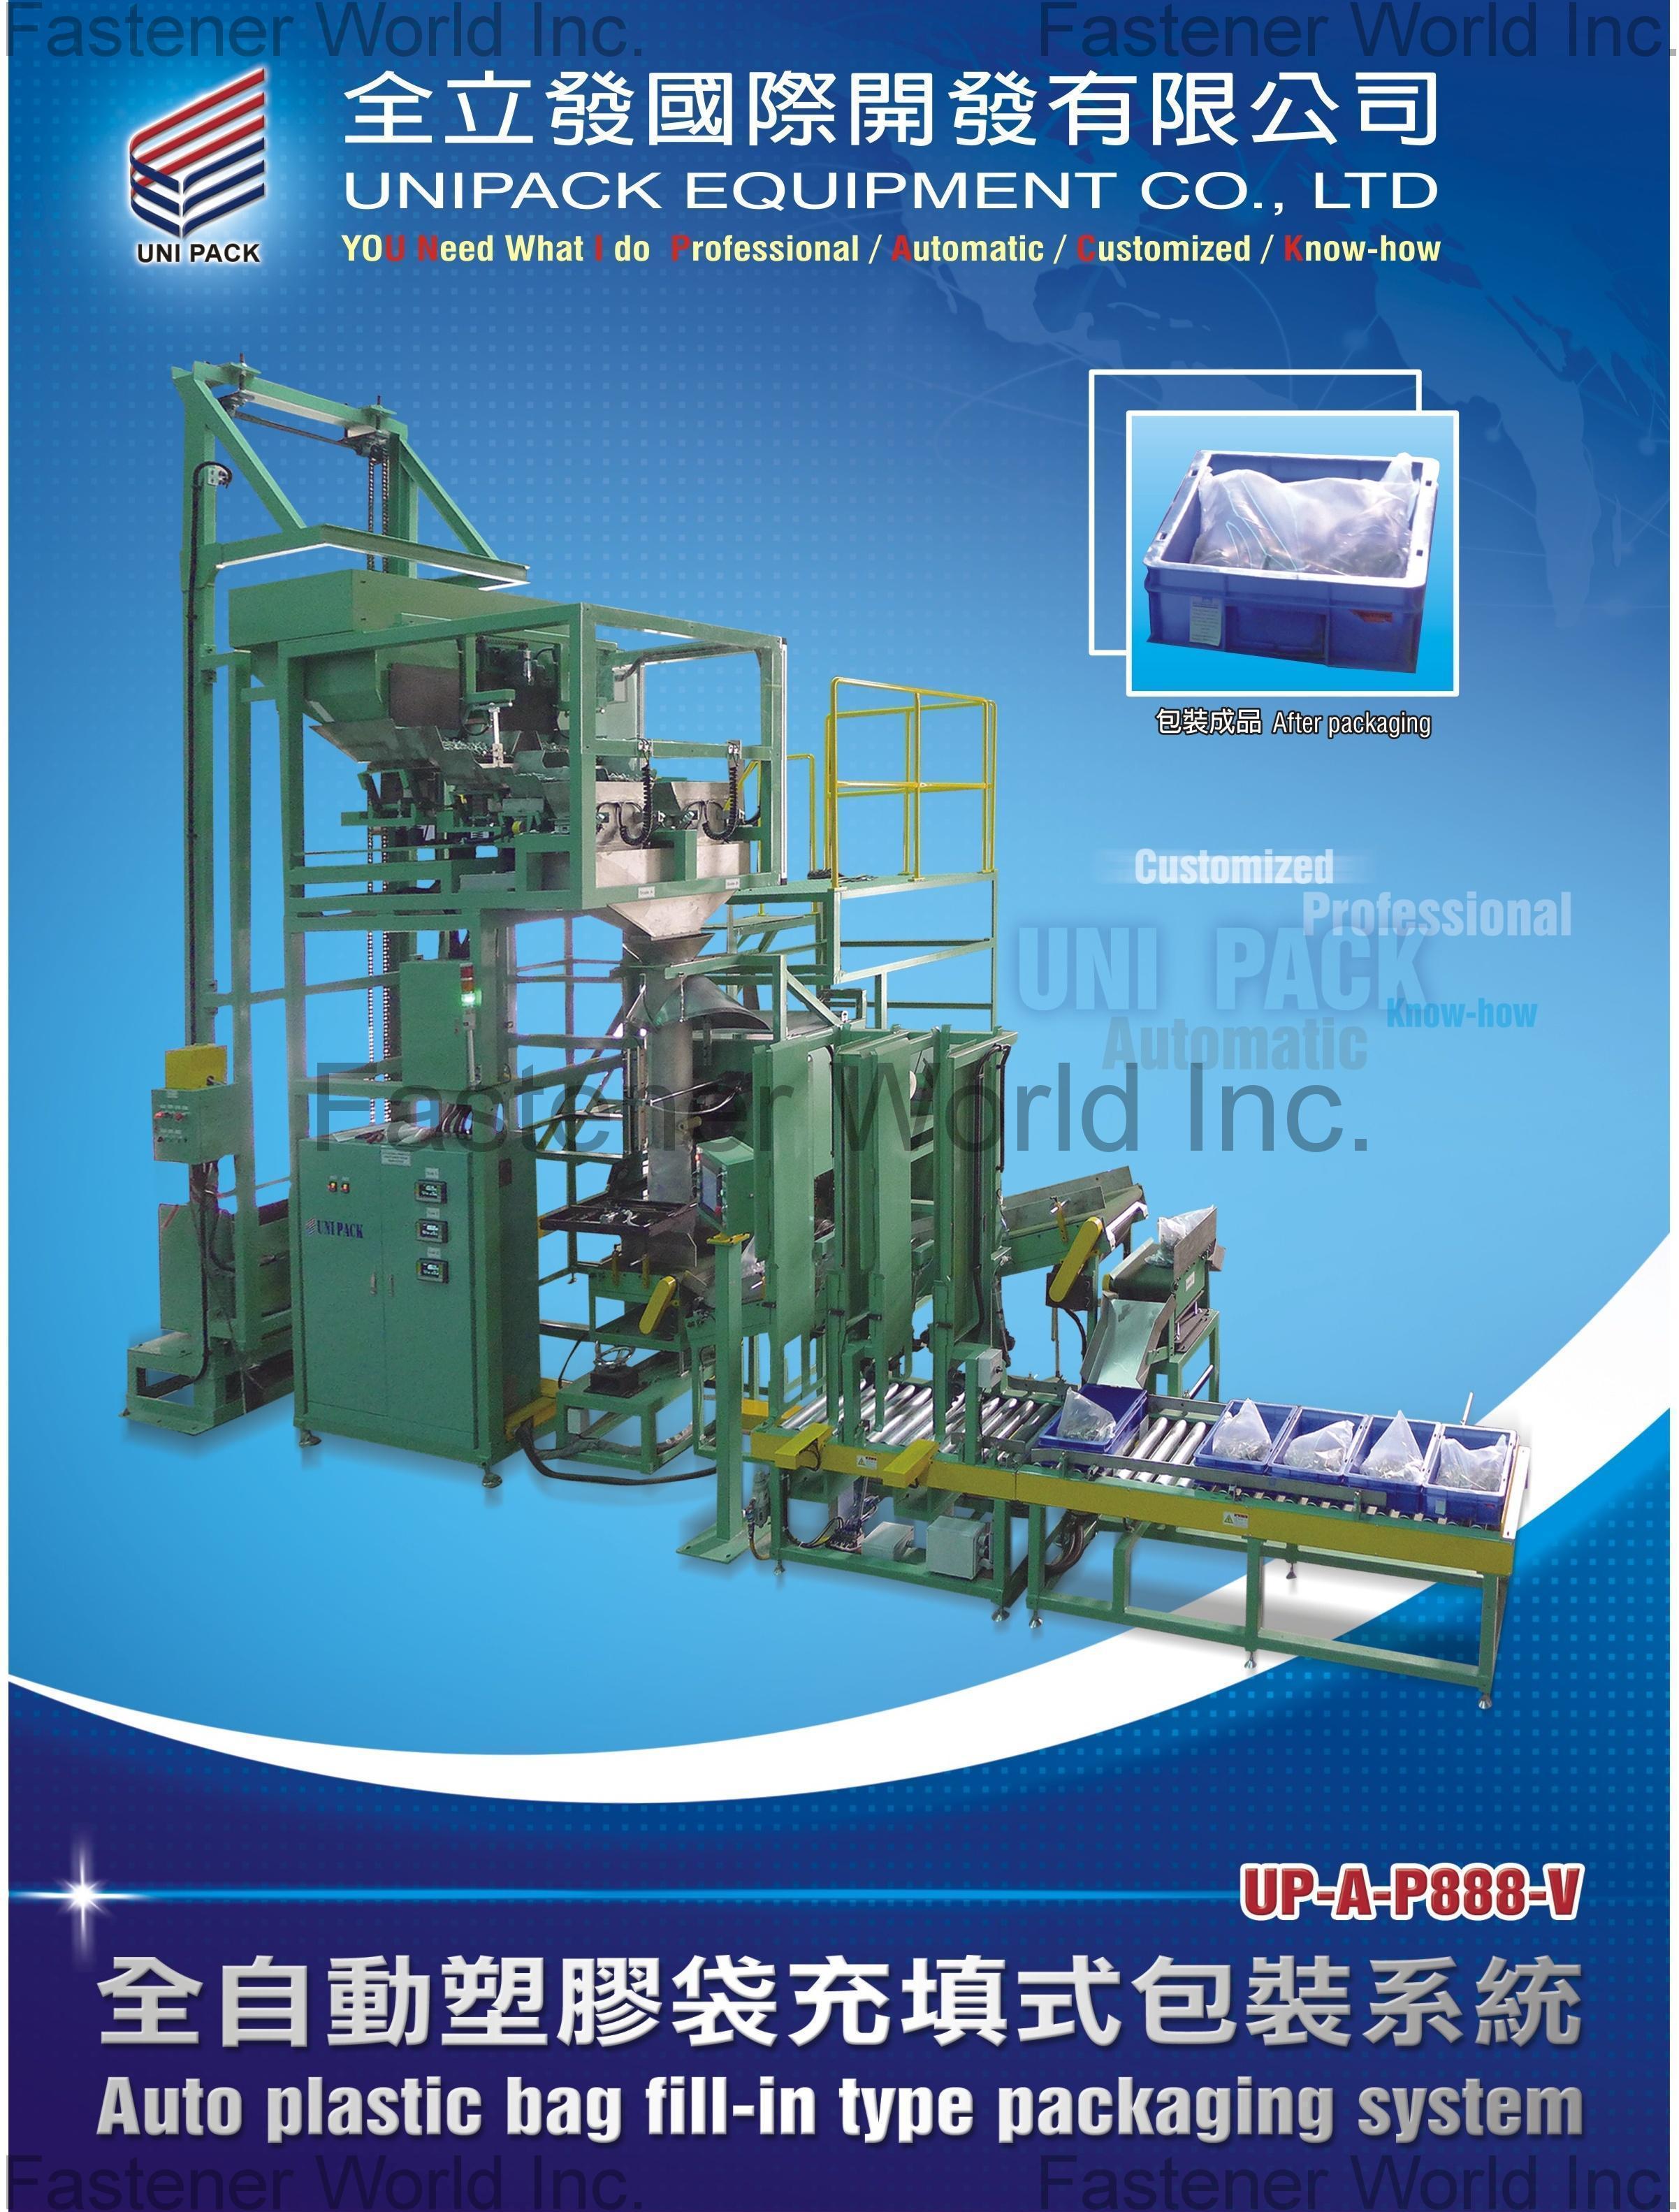 UNIPACK EQUIPMENT CO., LTD.  , Auto plastic bag fill-in type packaging system , Auto Klt Fill-in Type Packaging Machine